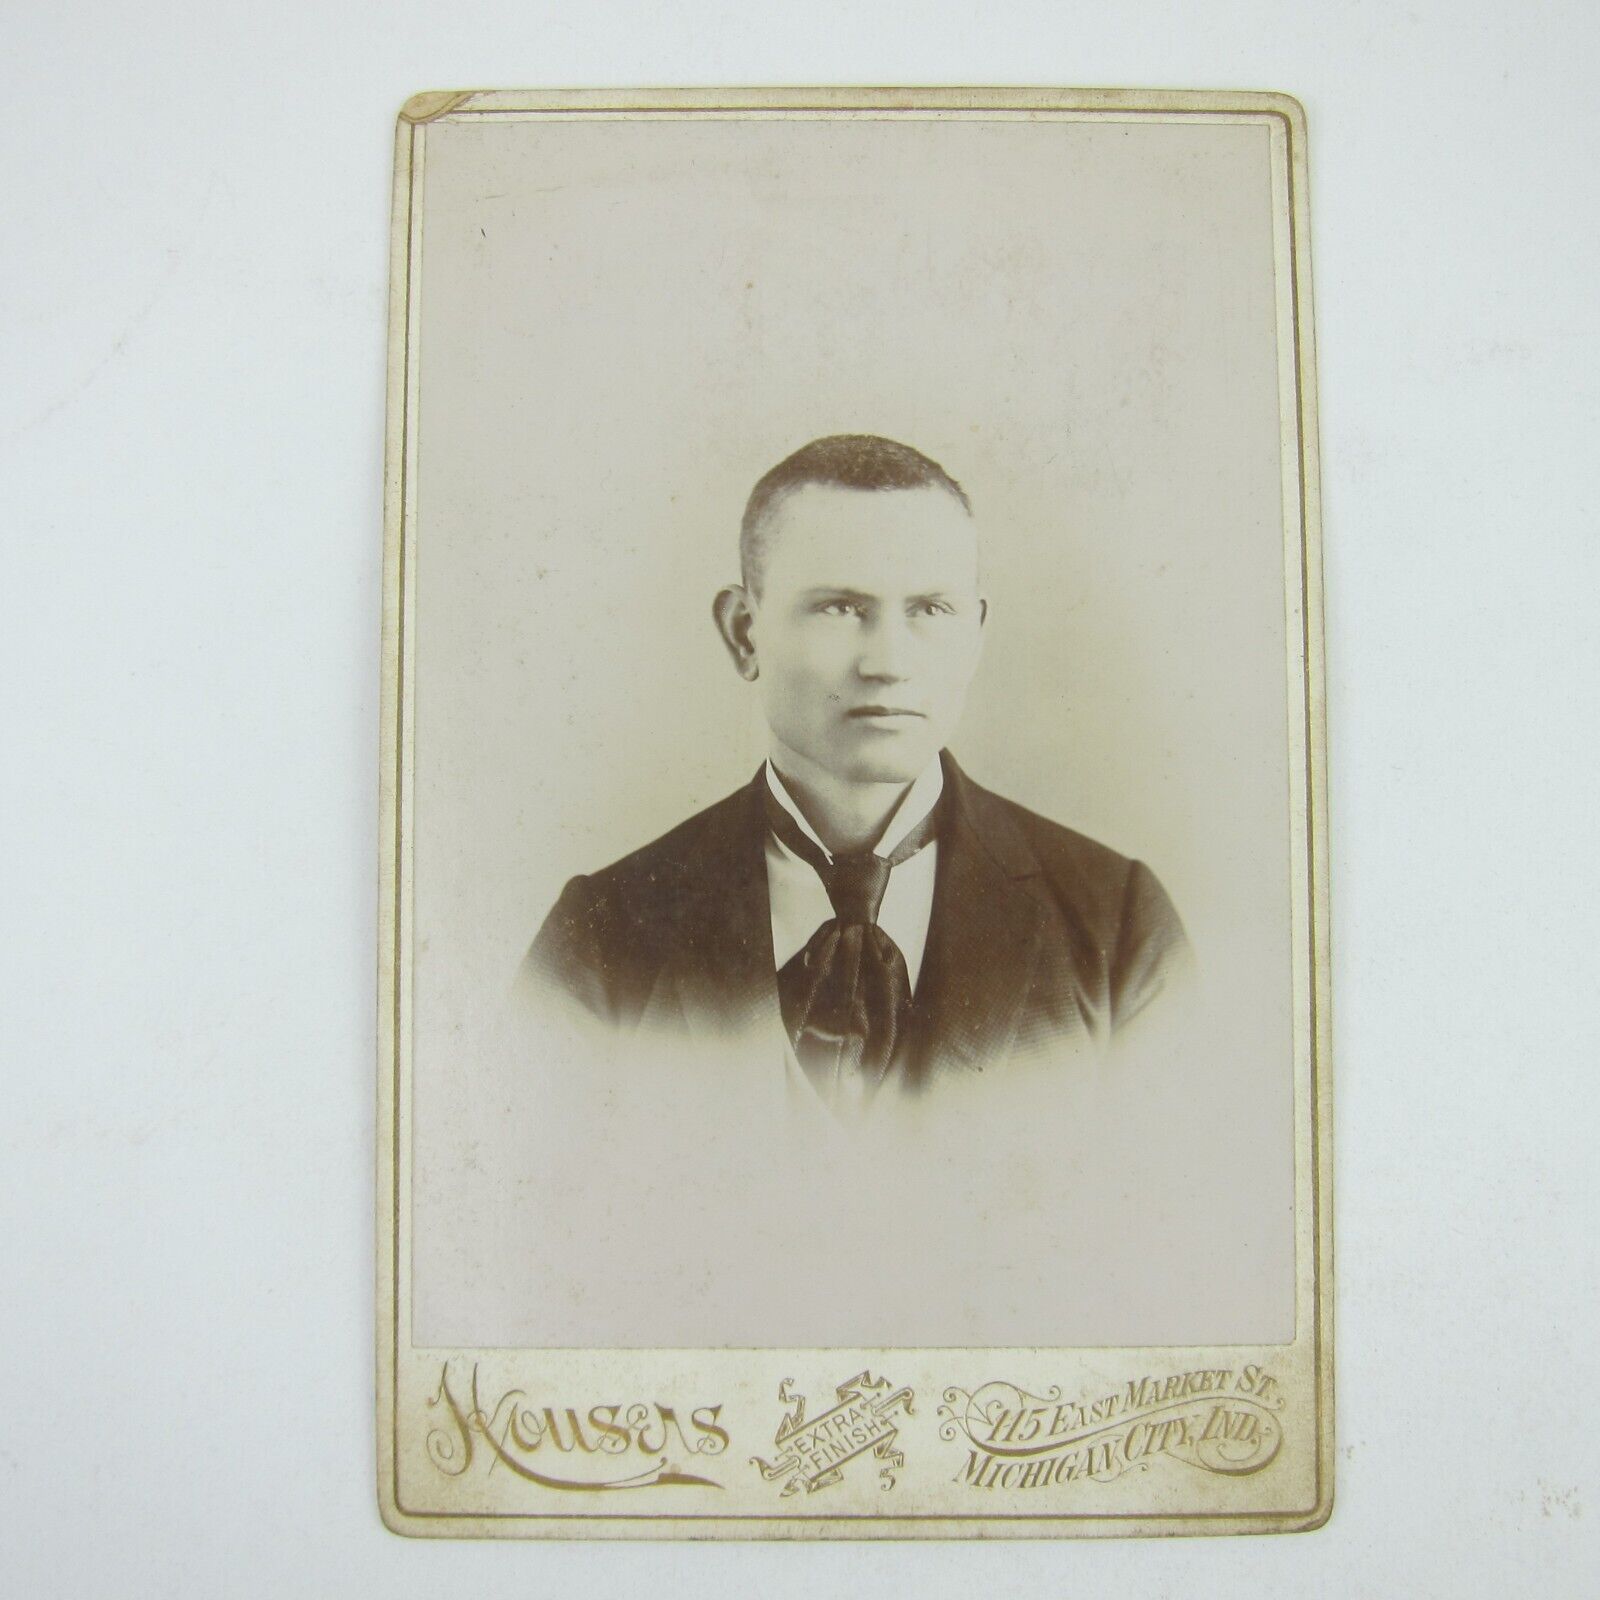 Cabinet Card Photograph Young Man Buzz Cut John W. Leisure Indiana Antique 1890s